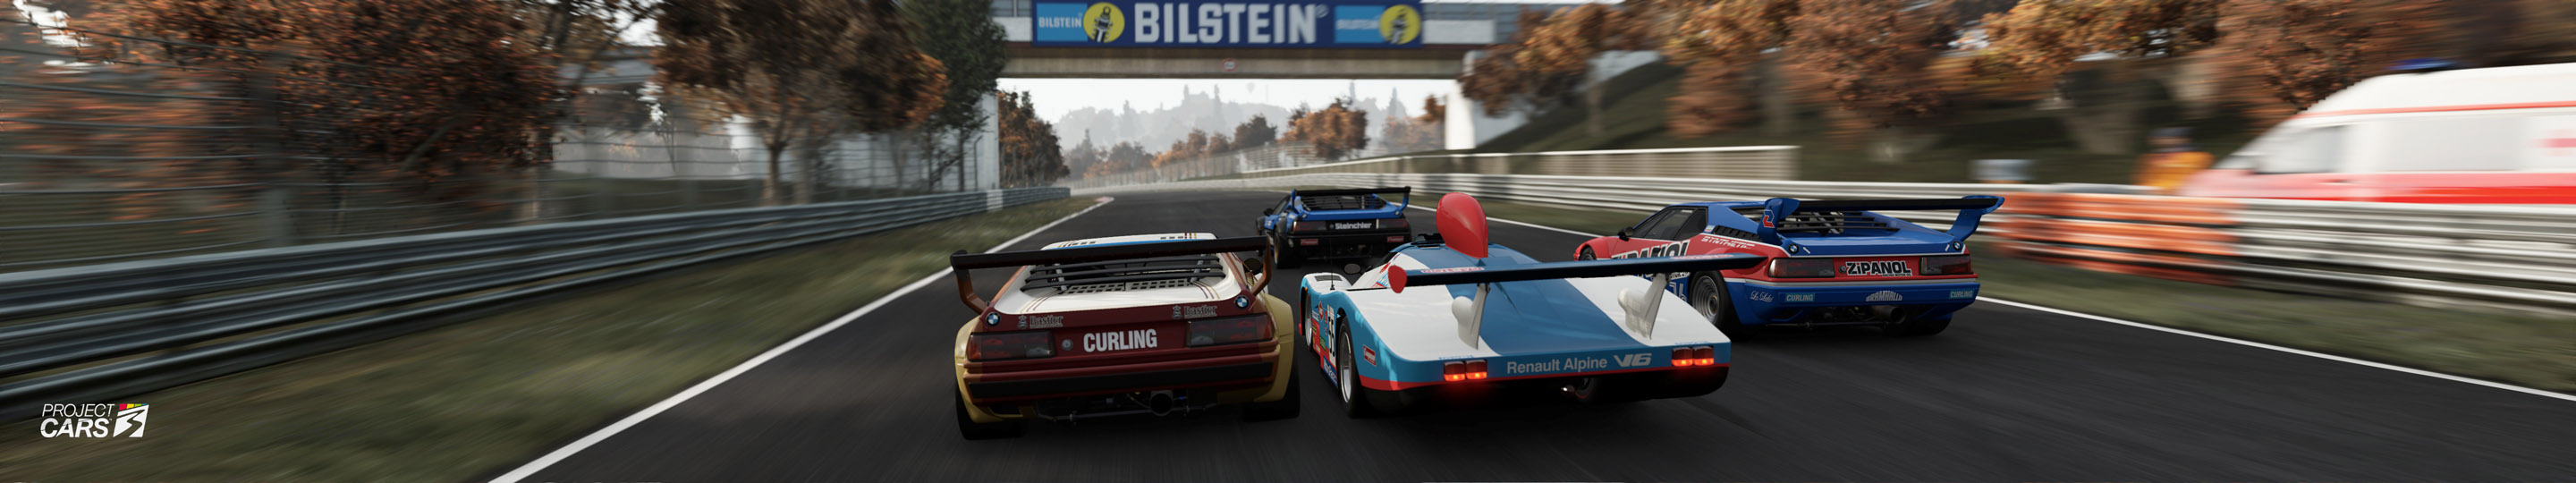 4 PROJECT CARS 3 ALPINE A442B at NORDSCHLEIFE copy.jpg